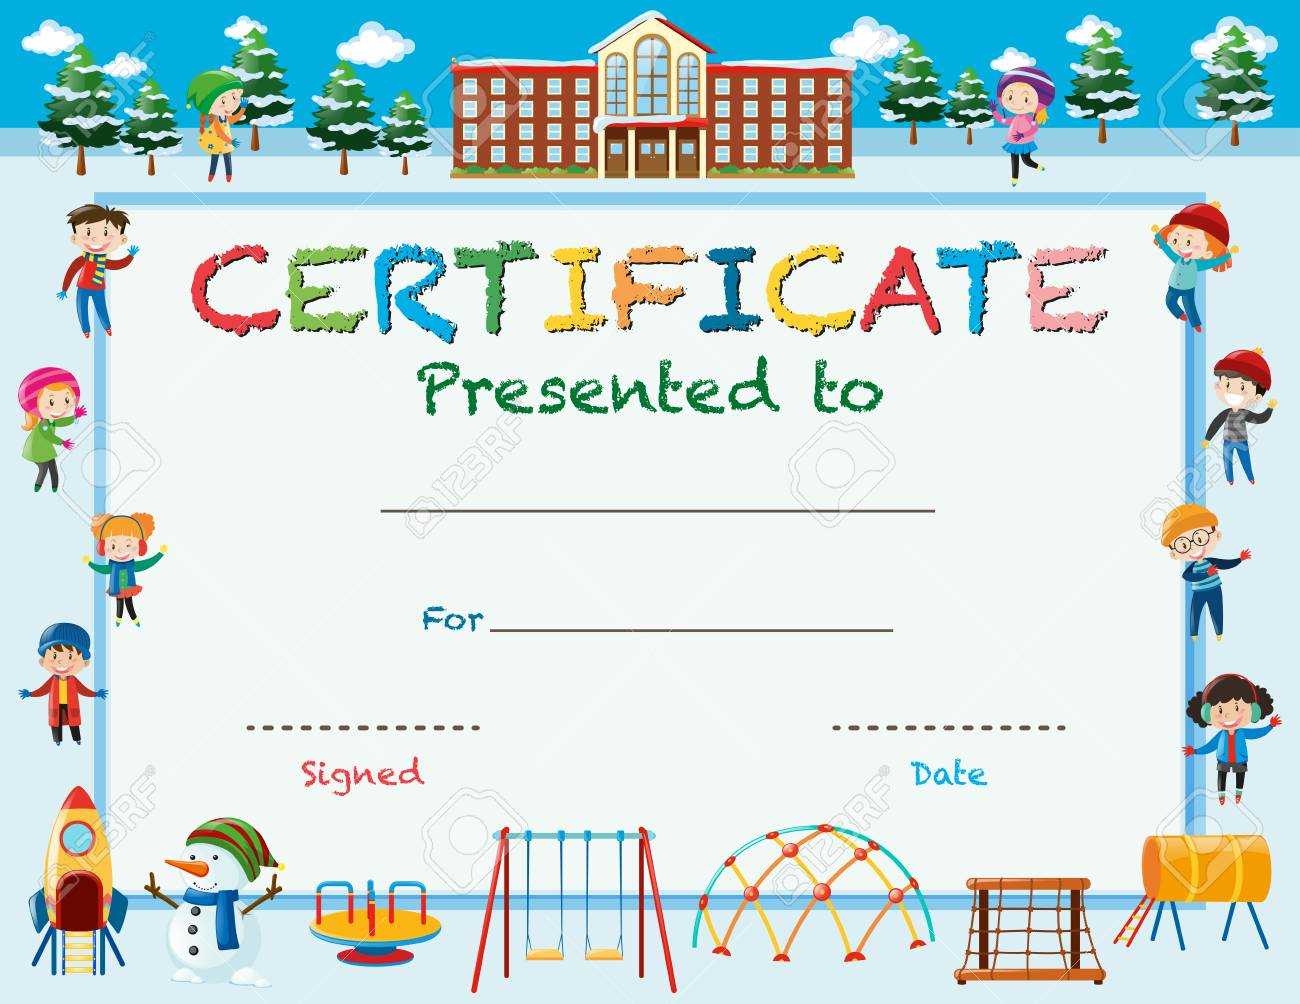 Certificate Template With Kids In Winter At School Illustration For Certificate Templates For School